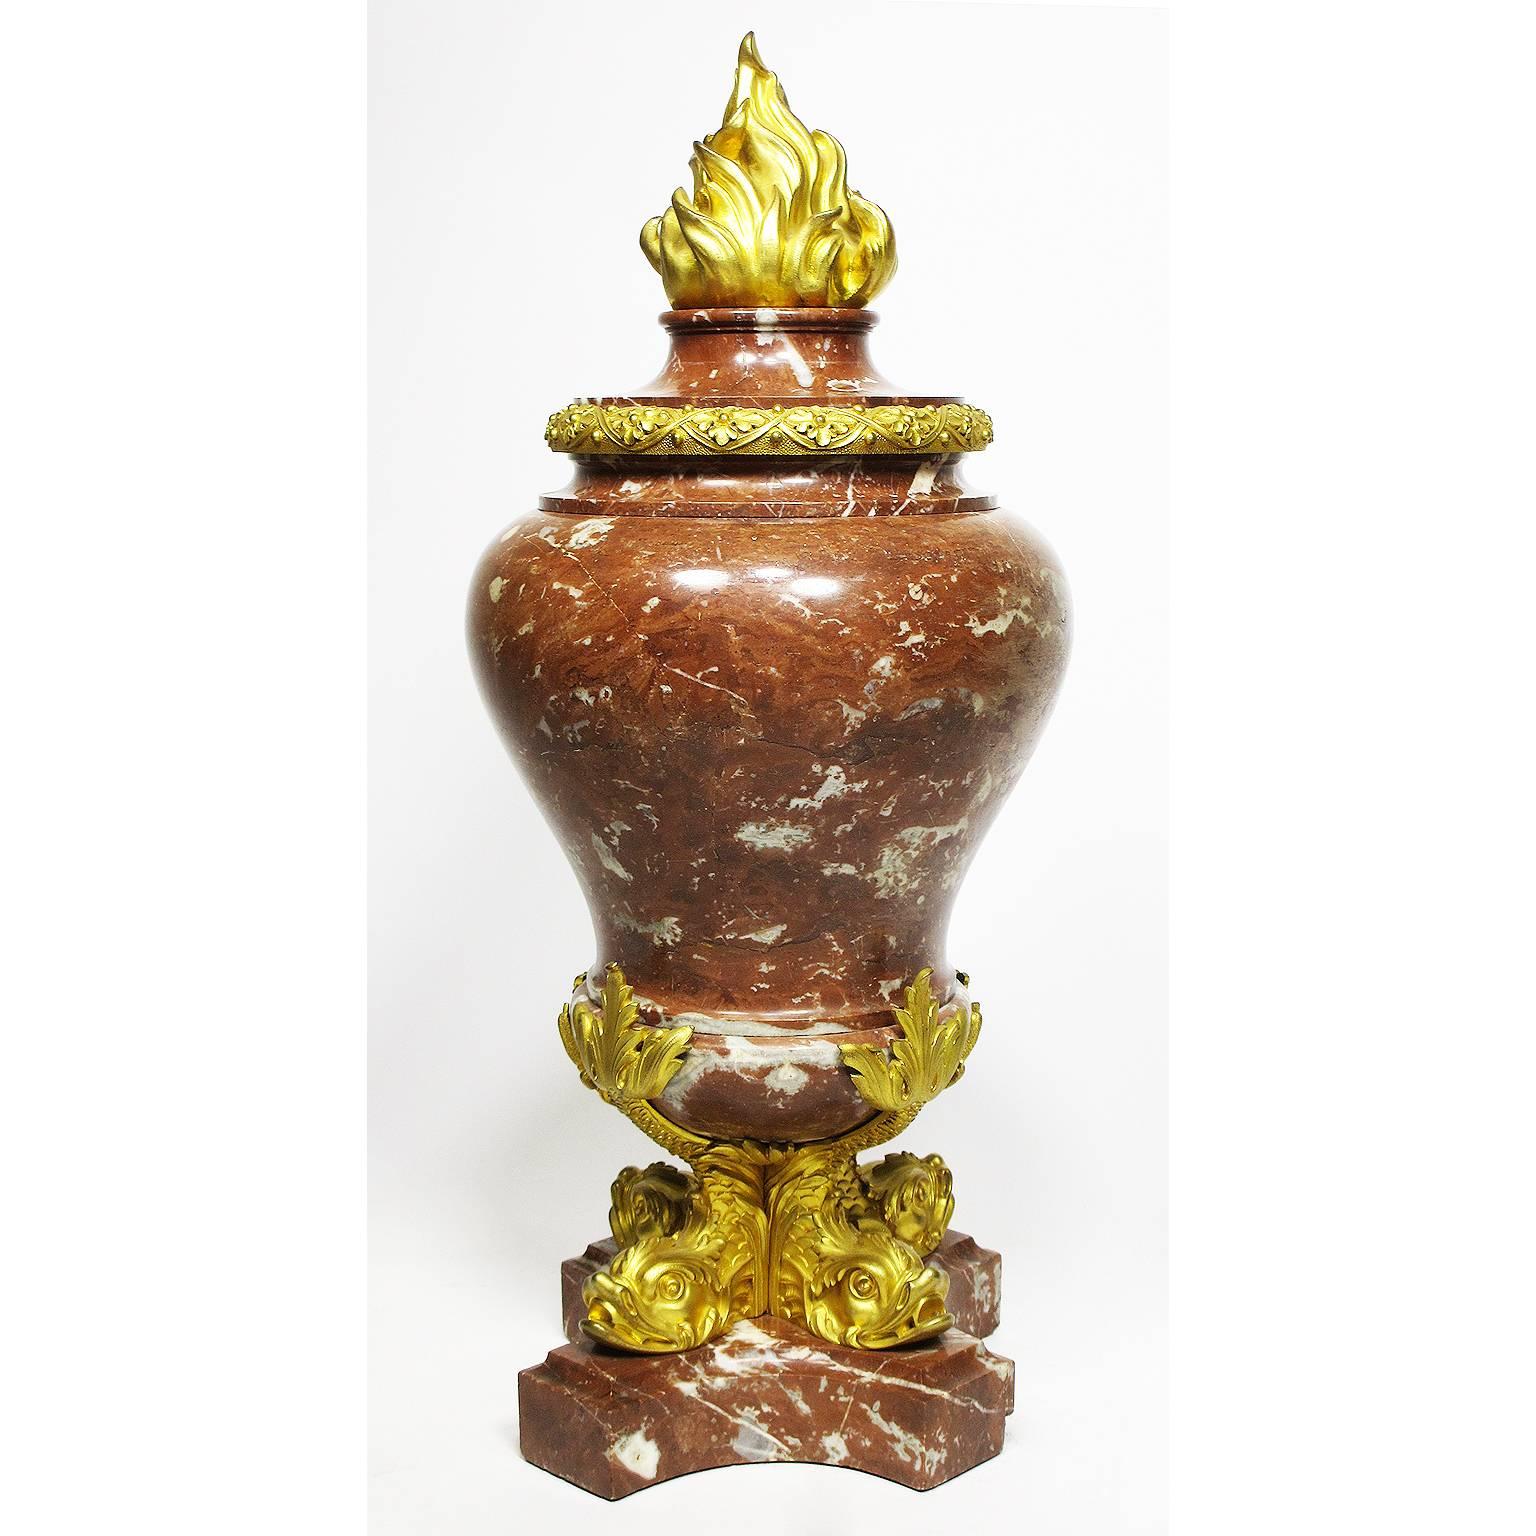 A fine pair of French 19th century Rouge-Royal marble and figural gilt bronze-mounted flambeaux urns surmounted with four ormolu figures of dolphins supporting the center urn with their upright tails and crowned with an ormolu burning flame, Paris,